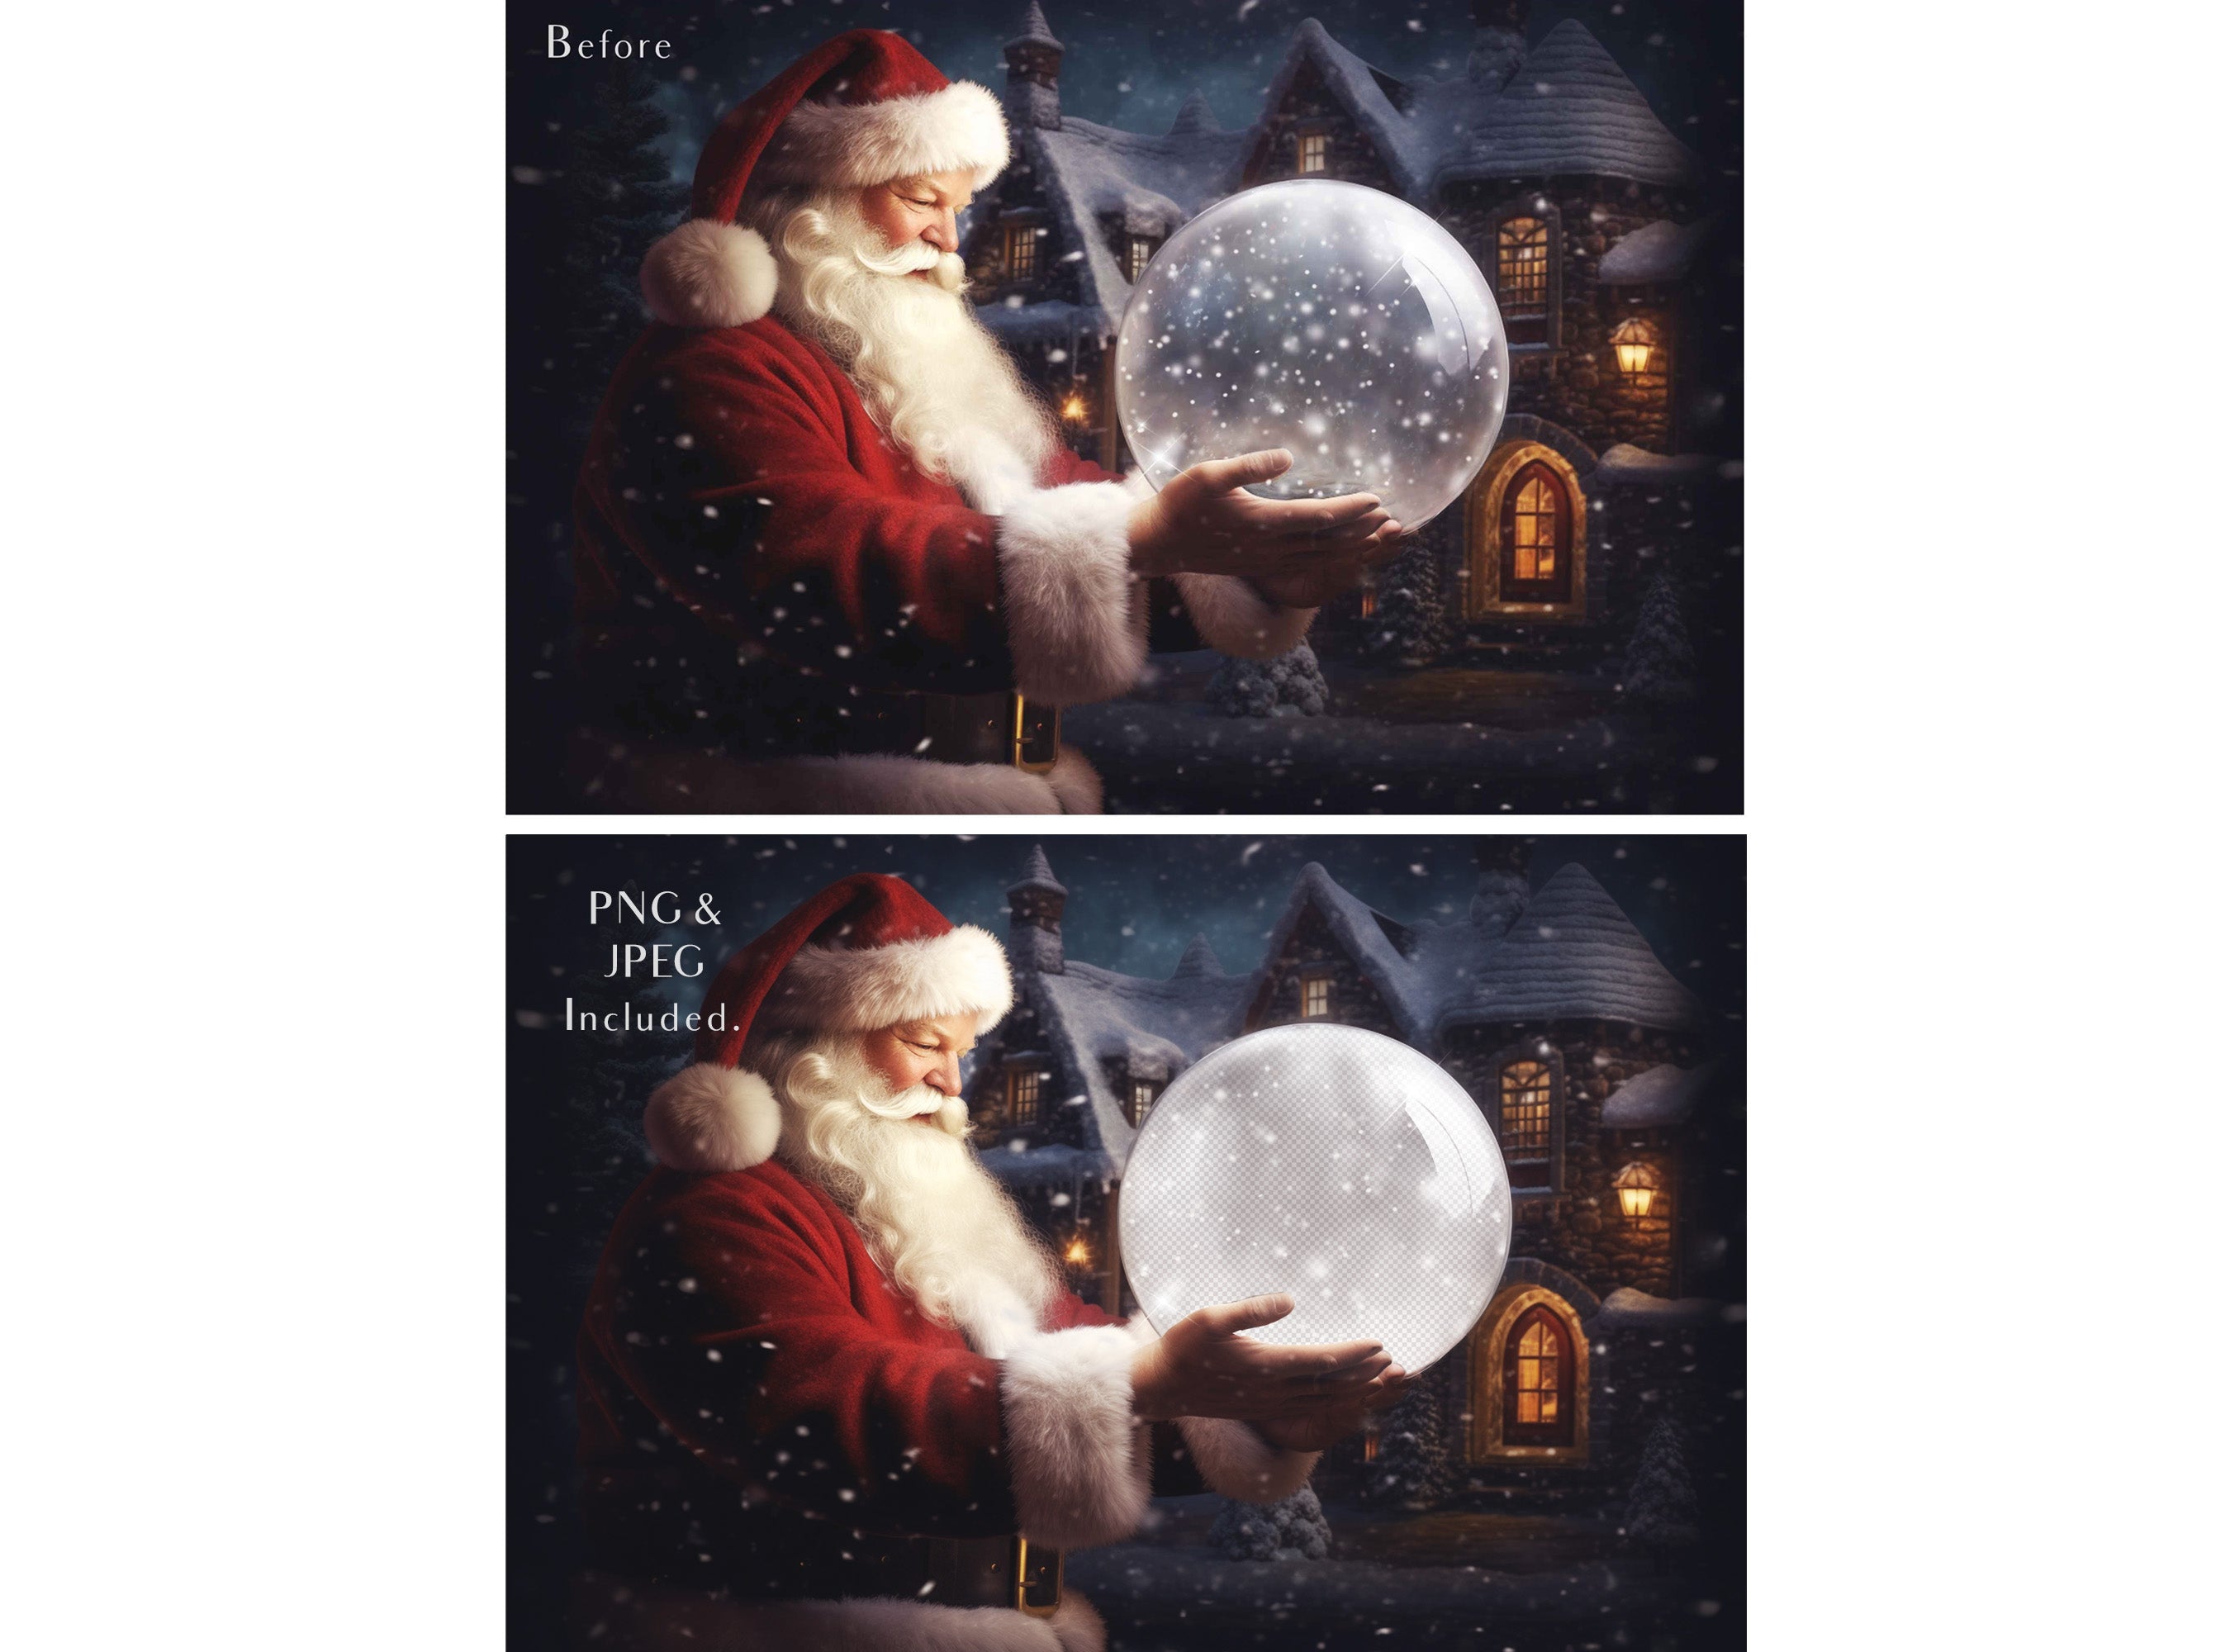 Digital Snow Globe Background, with Png snow overlays & PSD Template. The globe is transparent, perfect for adding your own images and retain the glass  effect.The file is 6000 x 4000, 300dpi. Png Included. Use for Christmas edits, Photography, Card Crafts, Scrapbooking. Xmas Backdrops. Santa holding a glass ball.